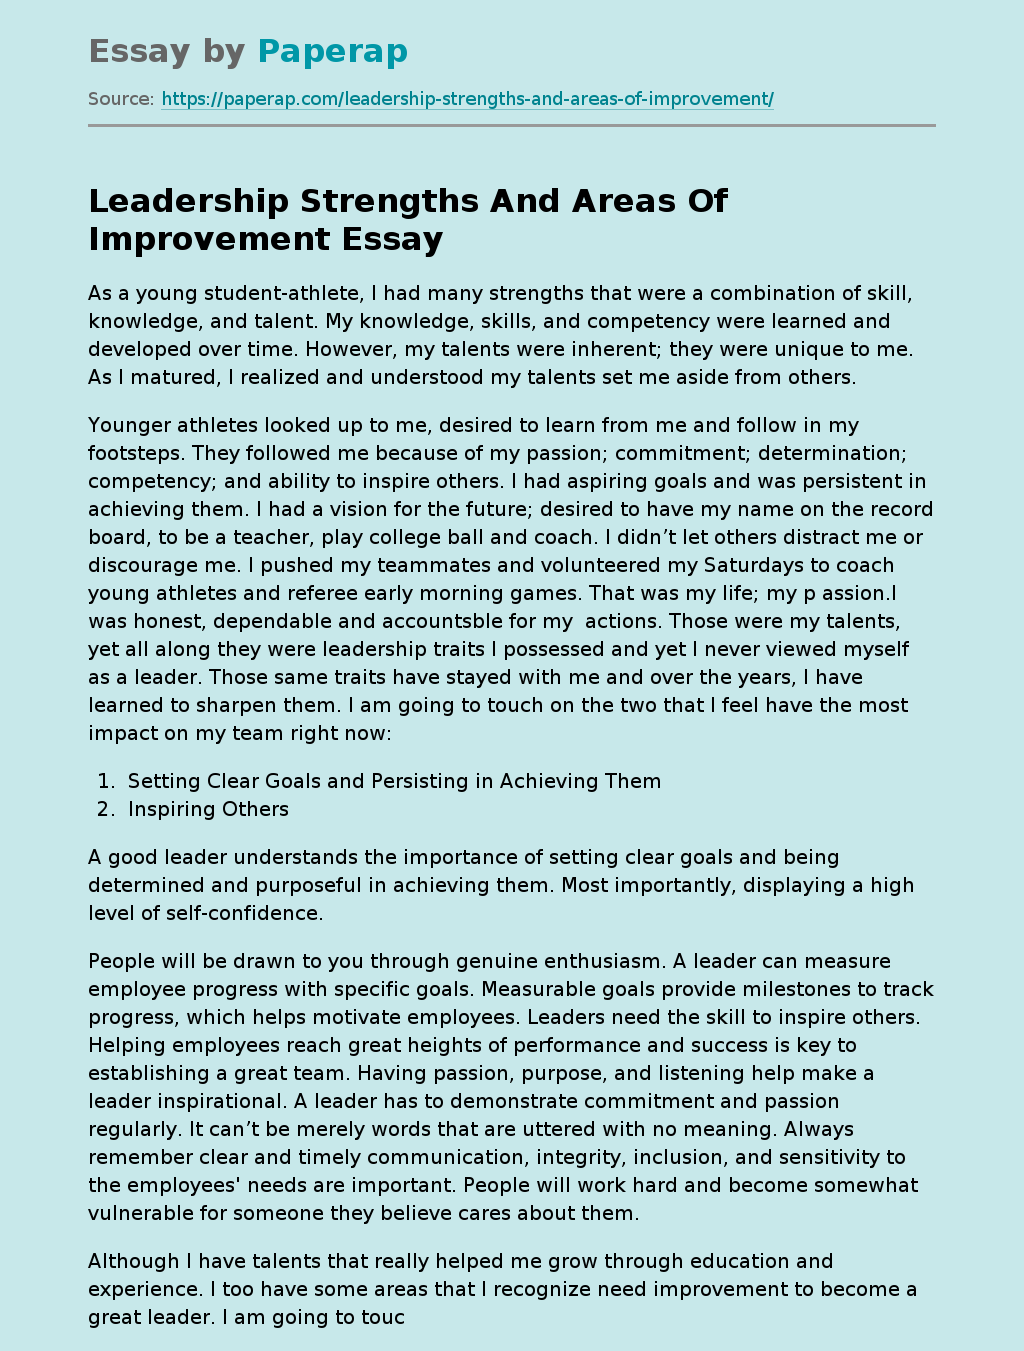 Leadership Strengths And Areas Of Improvement